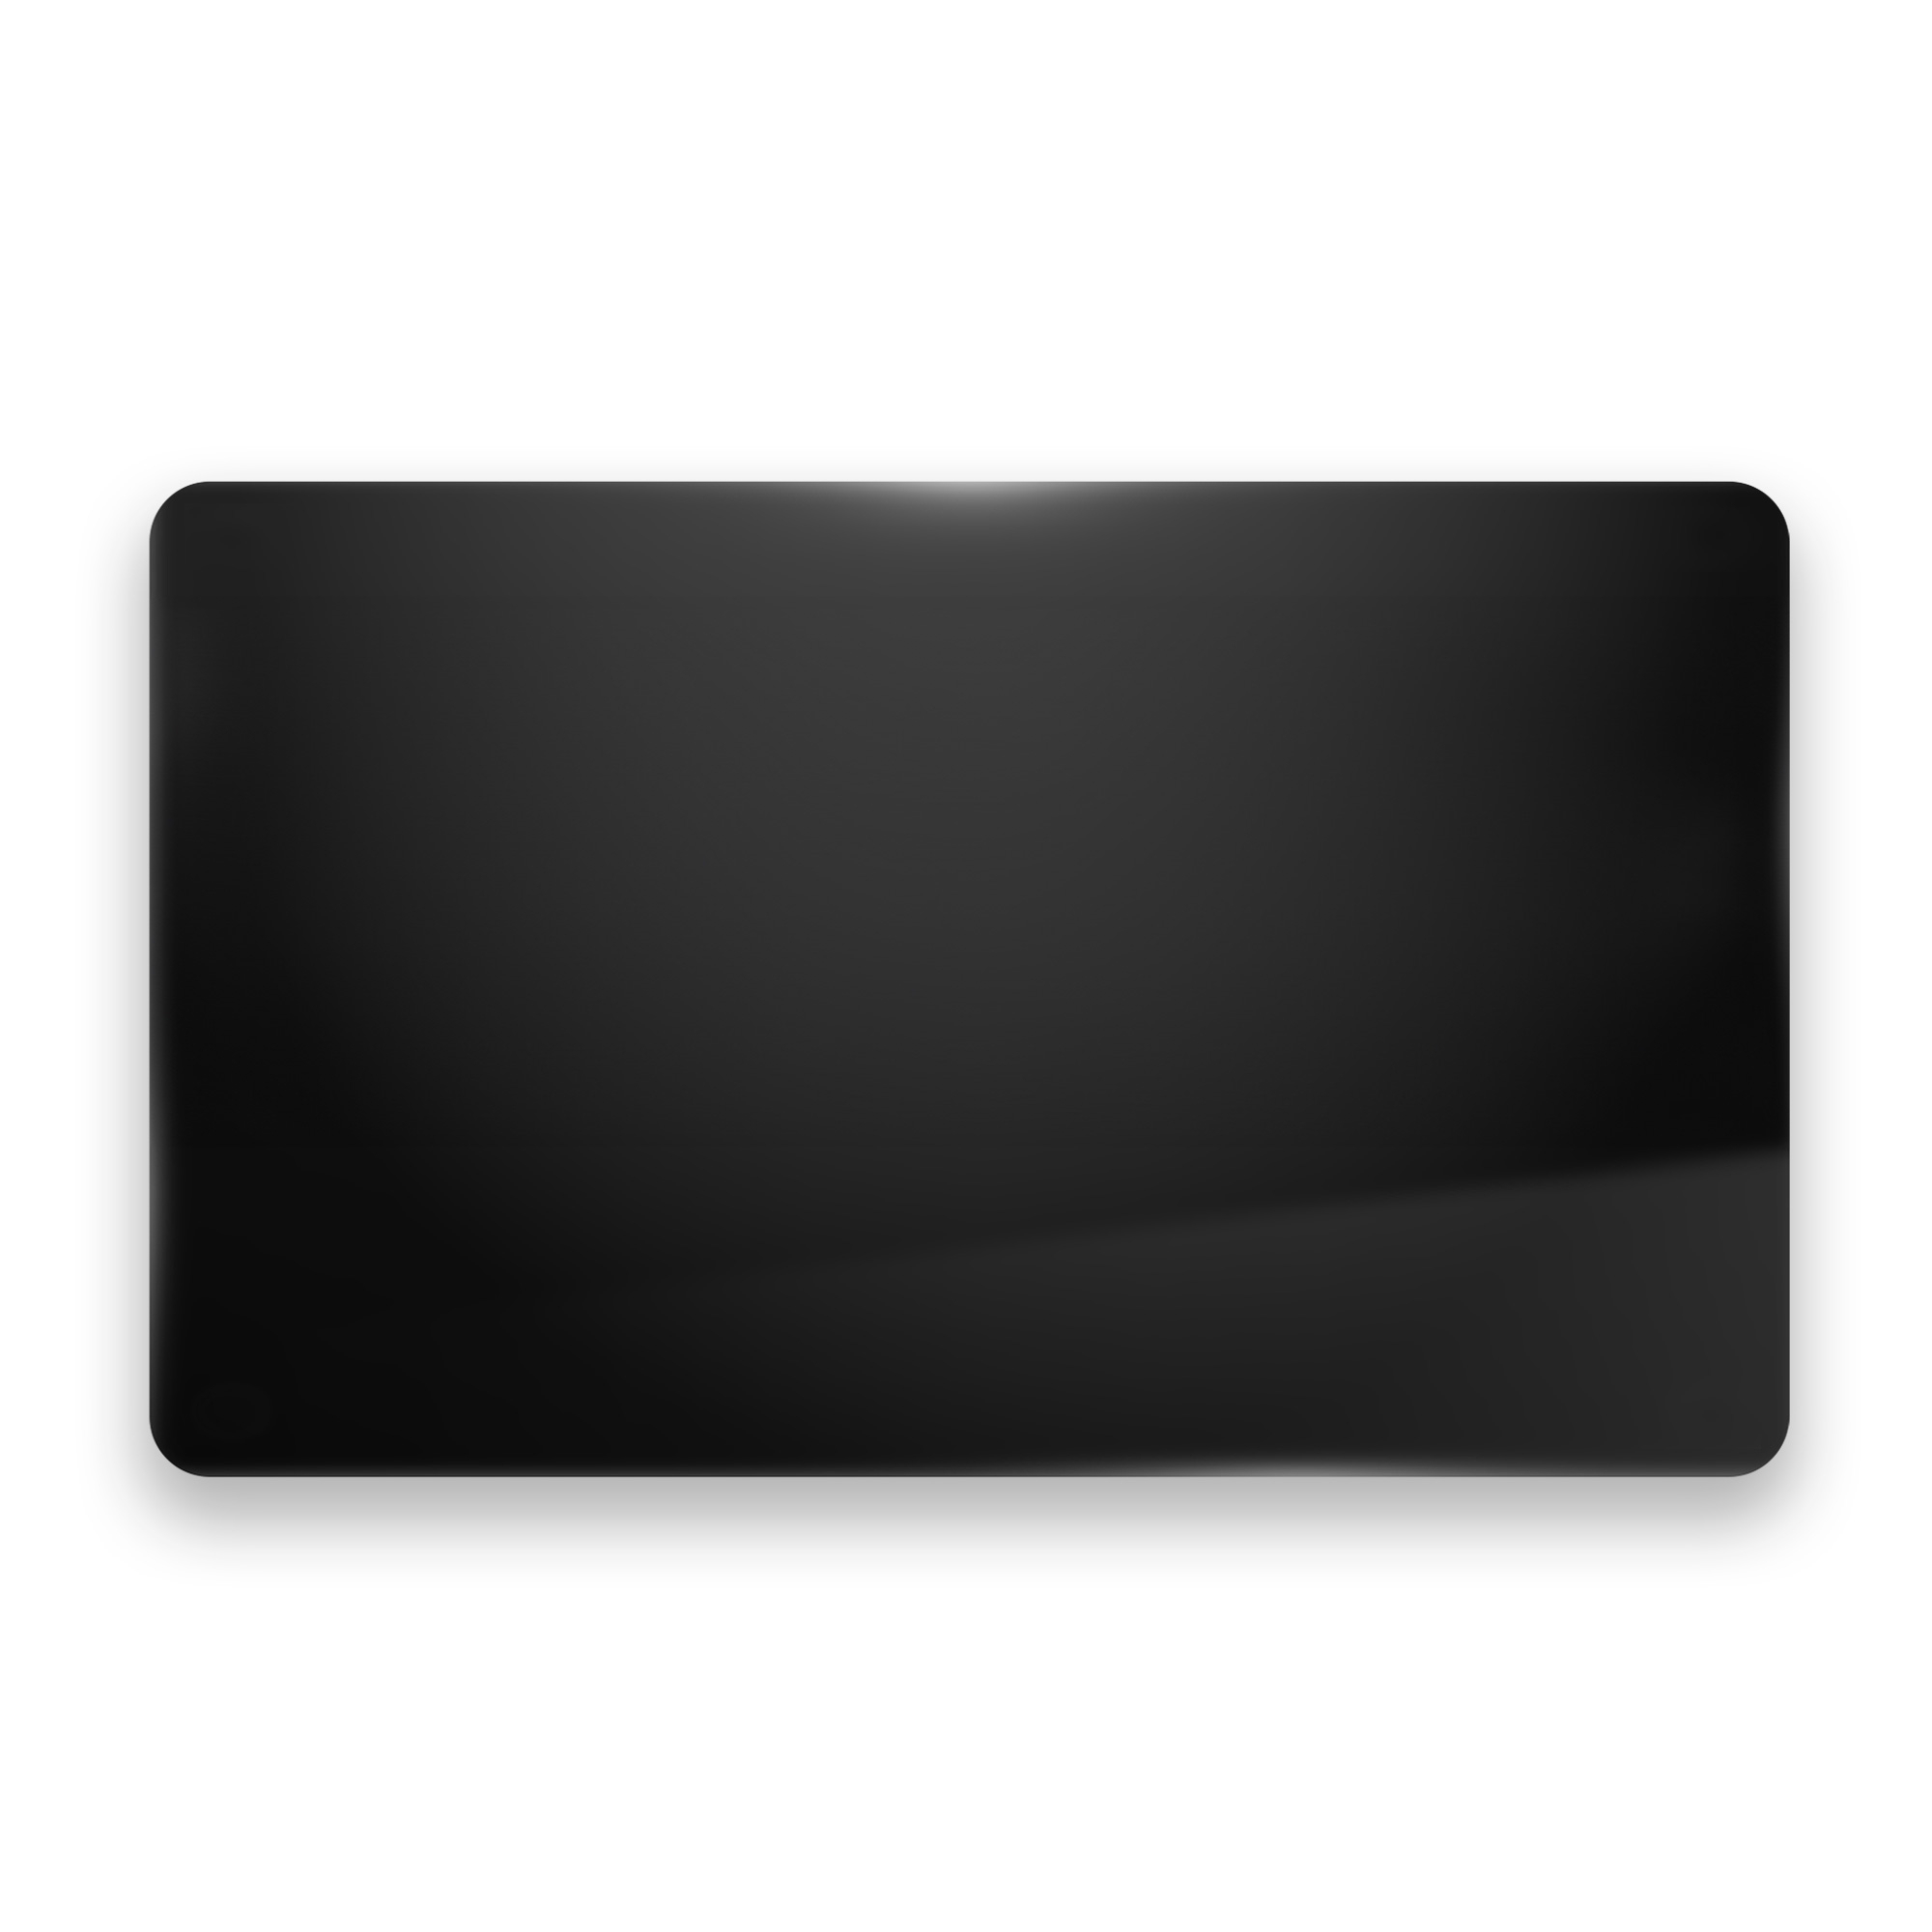 Pebbly - Multifunctional Glass Protection Board 40 x 30 cm - Black